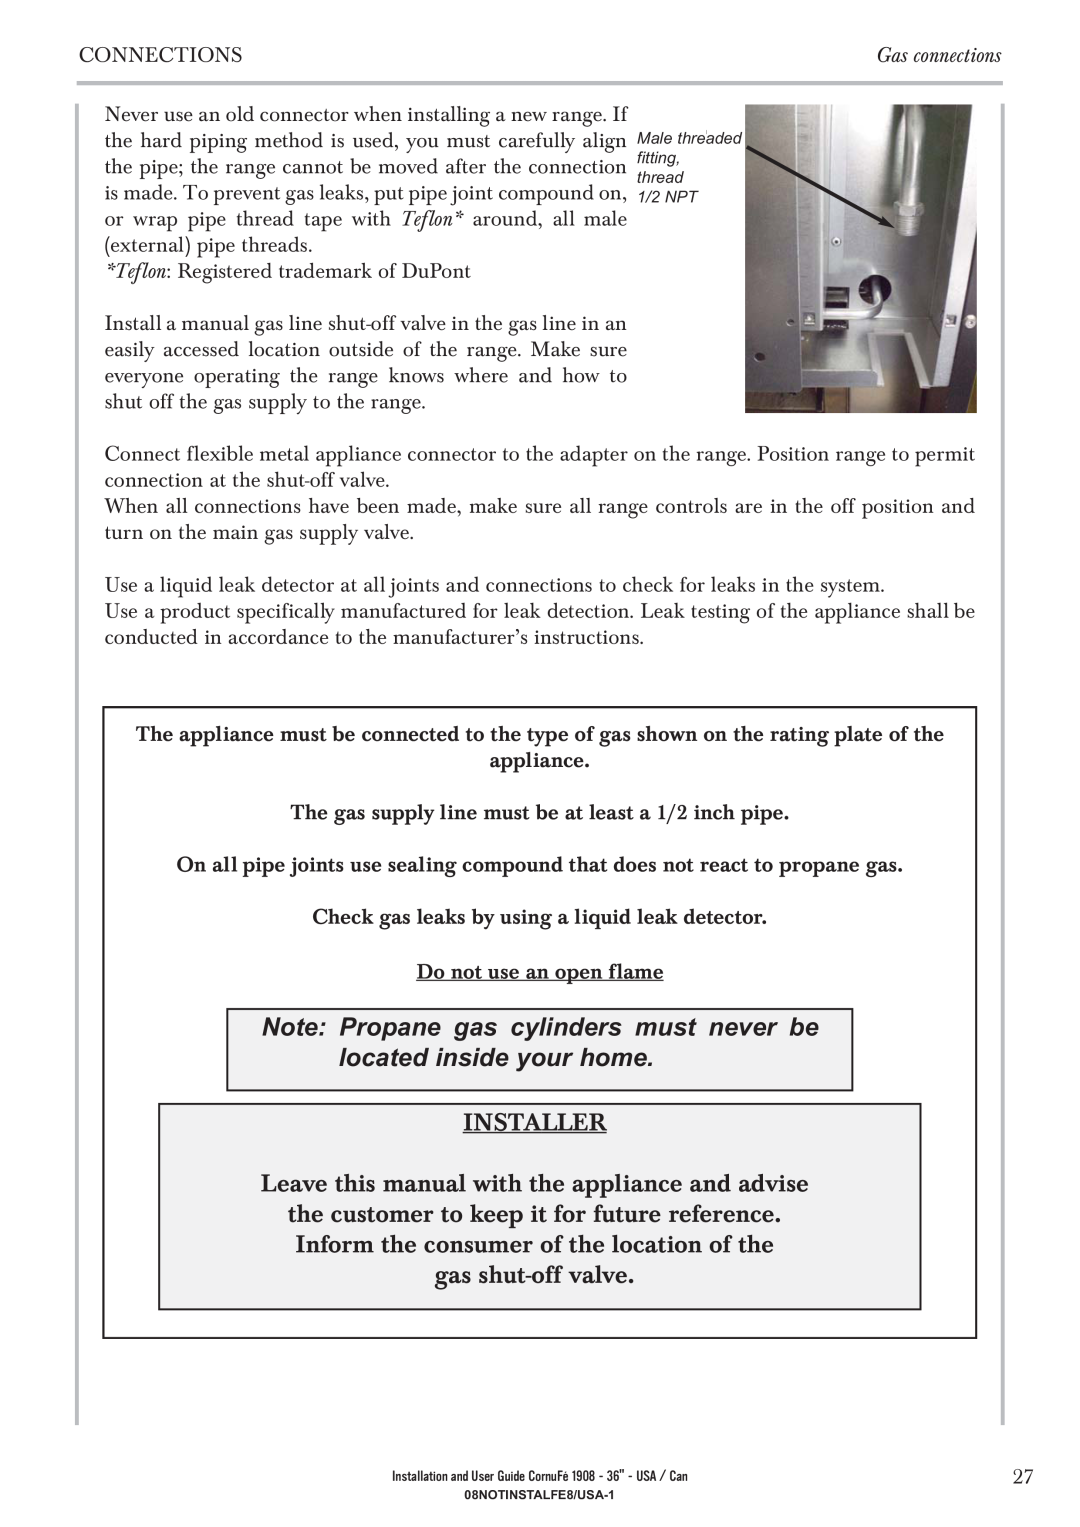 GE 1908 - 36 manual Note Propane gas cylinders must never be located inside your home 